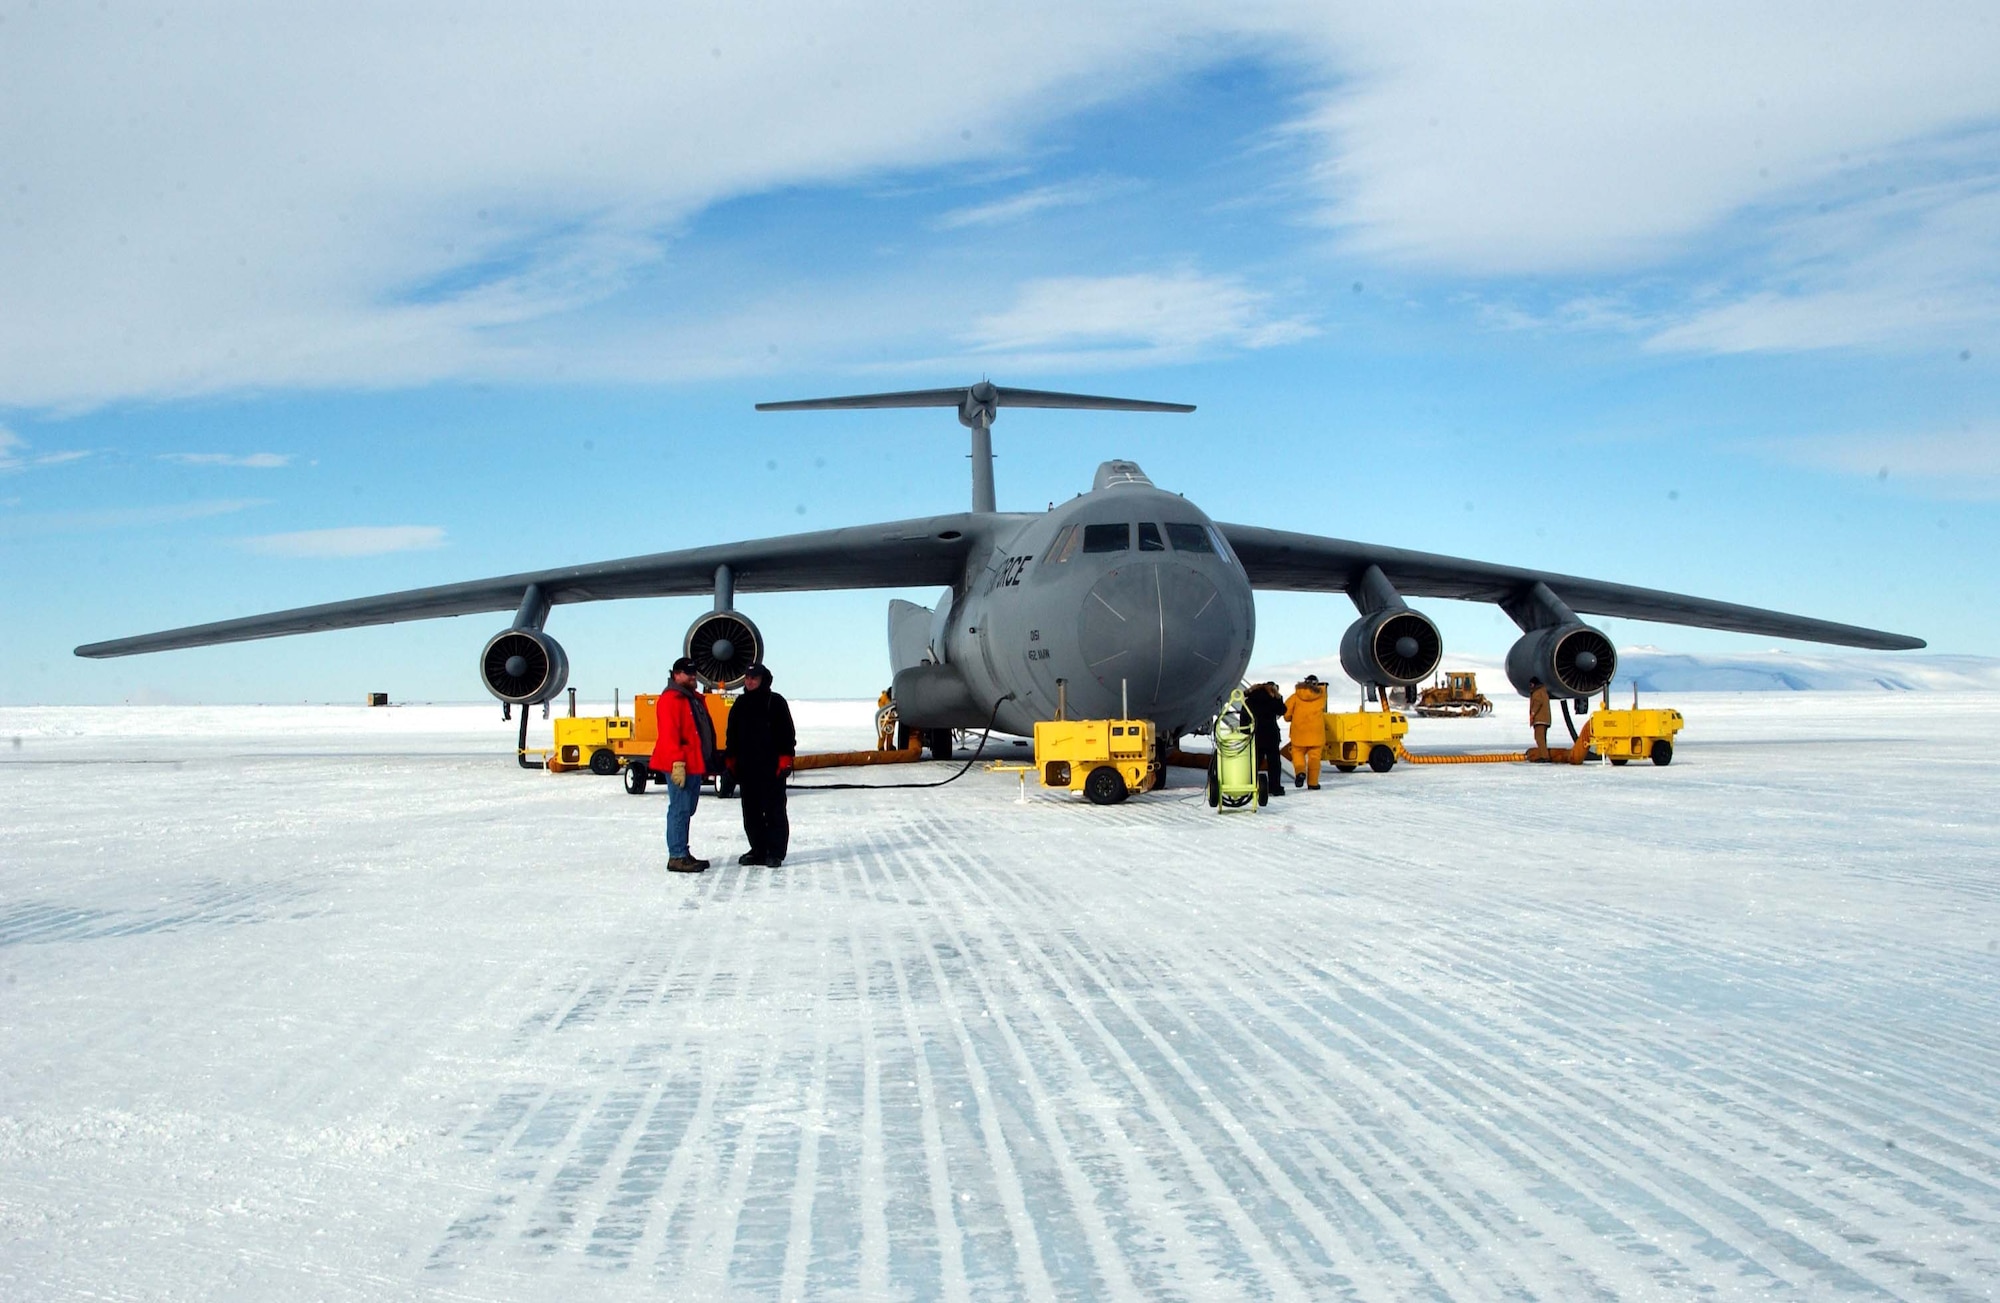 MCMURDO STATION, Antarctica -- A C-141 Starlifter sits here with engine heaters to keep mechanical parts from freezing up under the frigid condition.  Starlifters from the 445th Airlift Wing at Wright Patterson Air Force Base, Ohio, and the 452nd Air Mobility Wing at March Air Reserve Base, Calif., were here supporting Operation Deep Freeze.  (U.S. Air Force photo by Tech. Sgt. Joe Zuccaro)